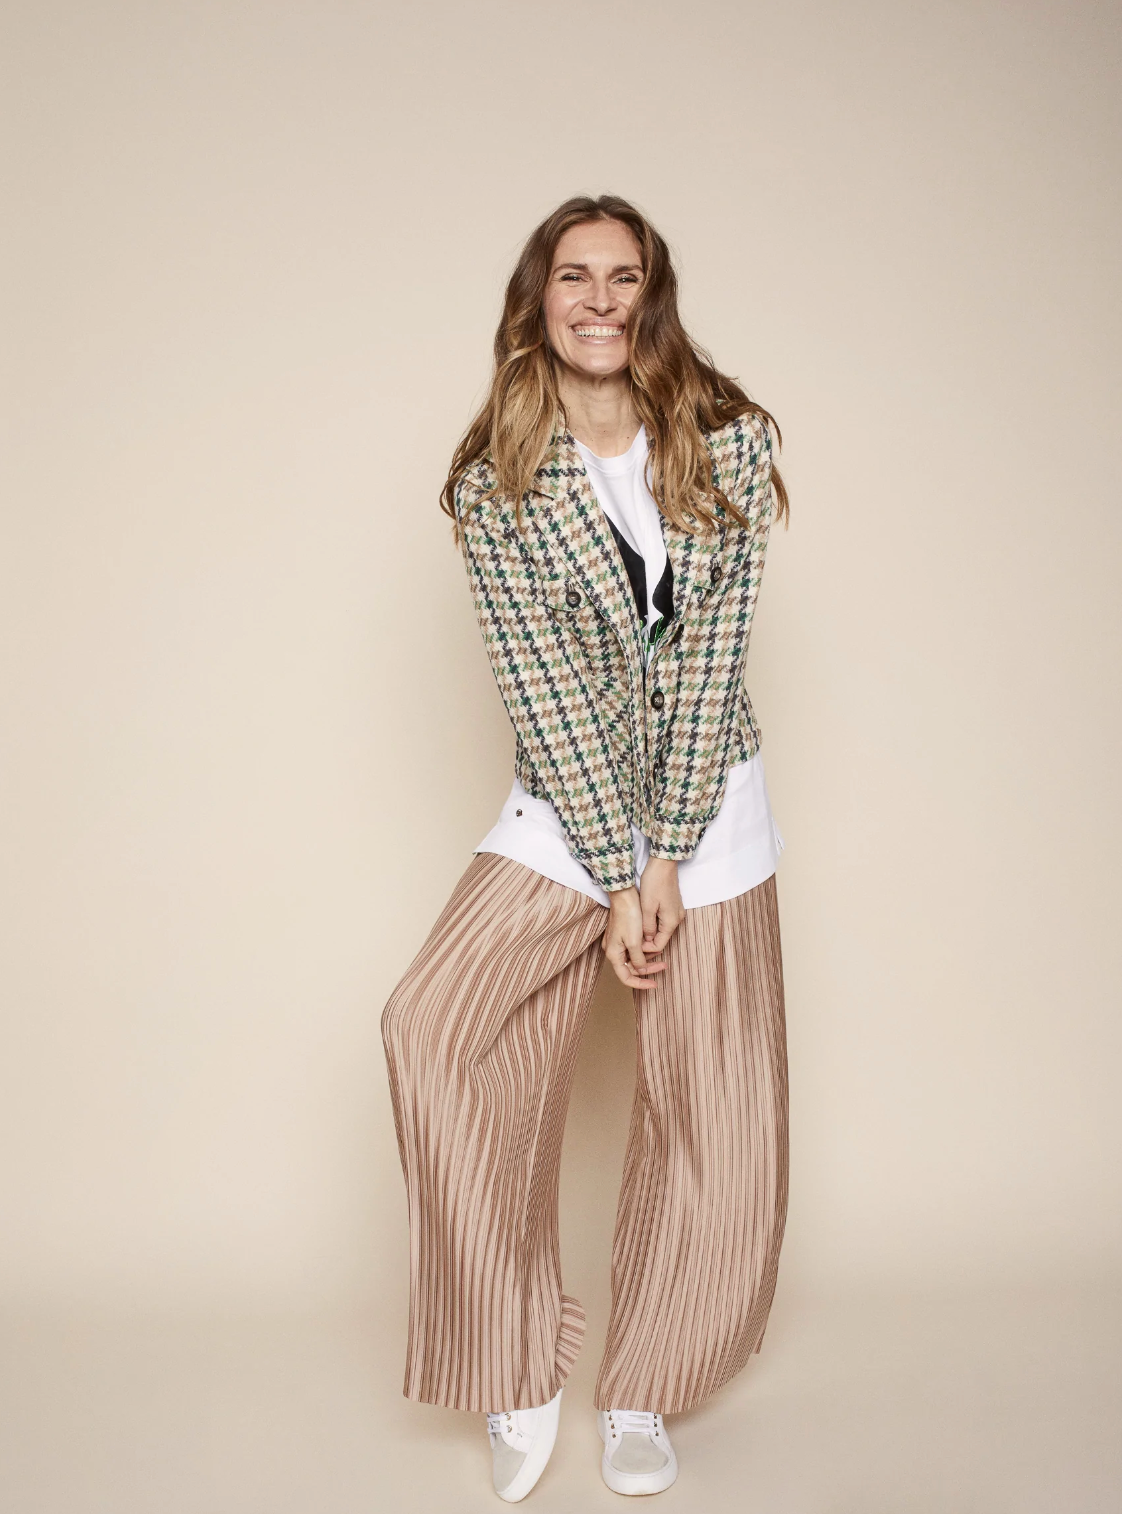 pleated pant in neutral based metallic beige gold. flare wide leg pant in flowing fabric, teamed with white tee and houndstooth jacket.